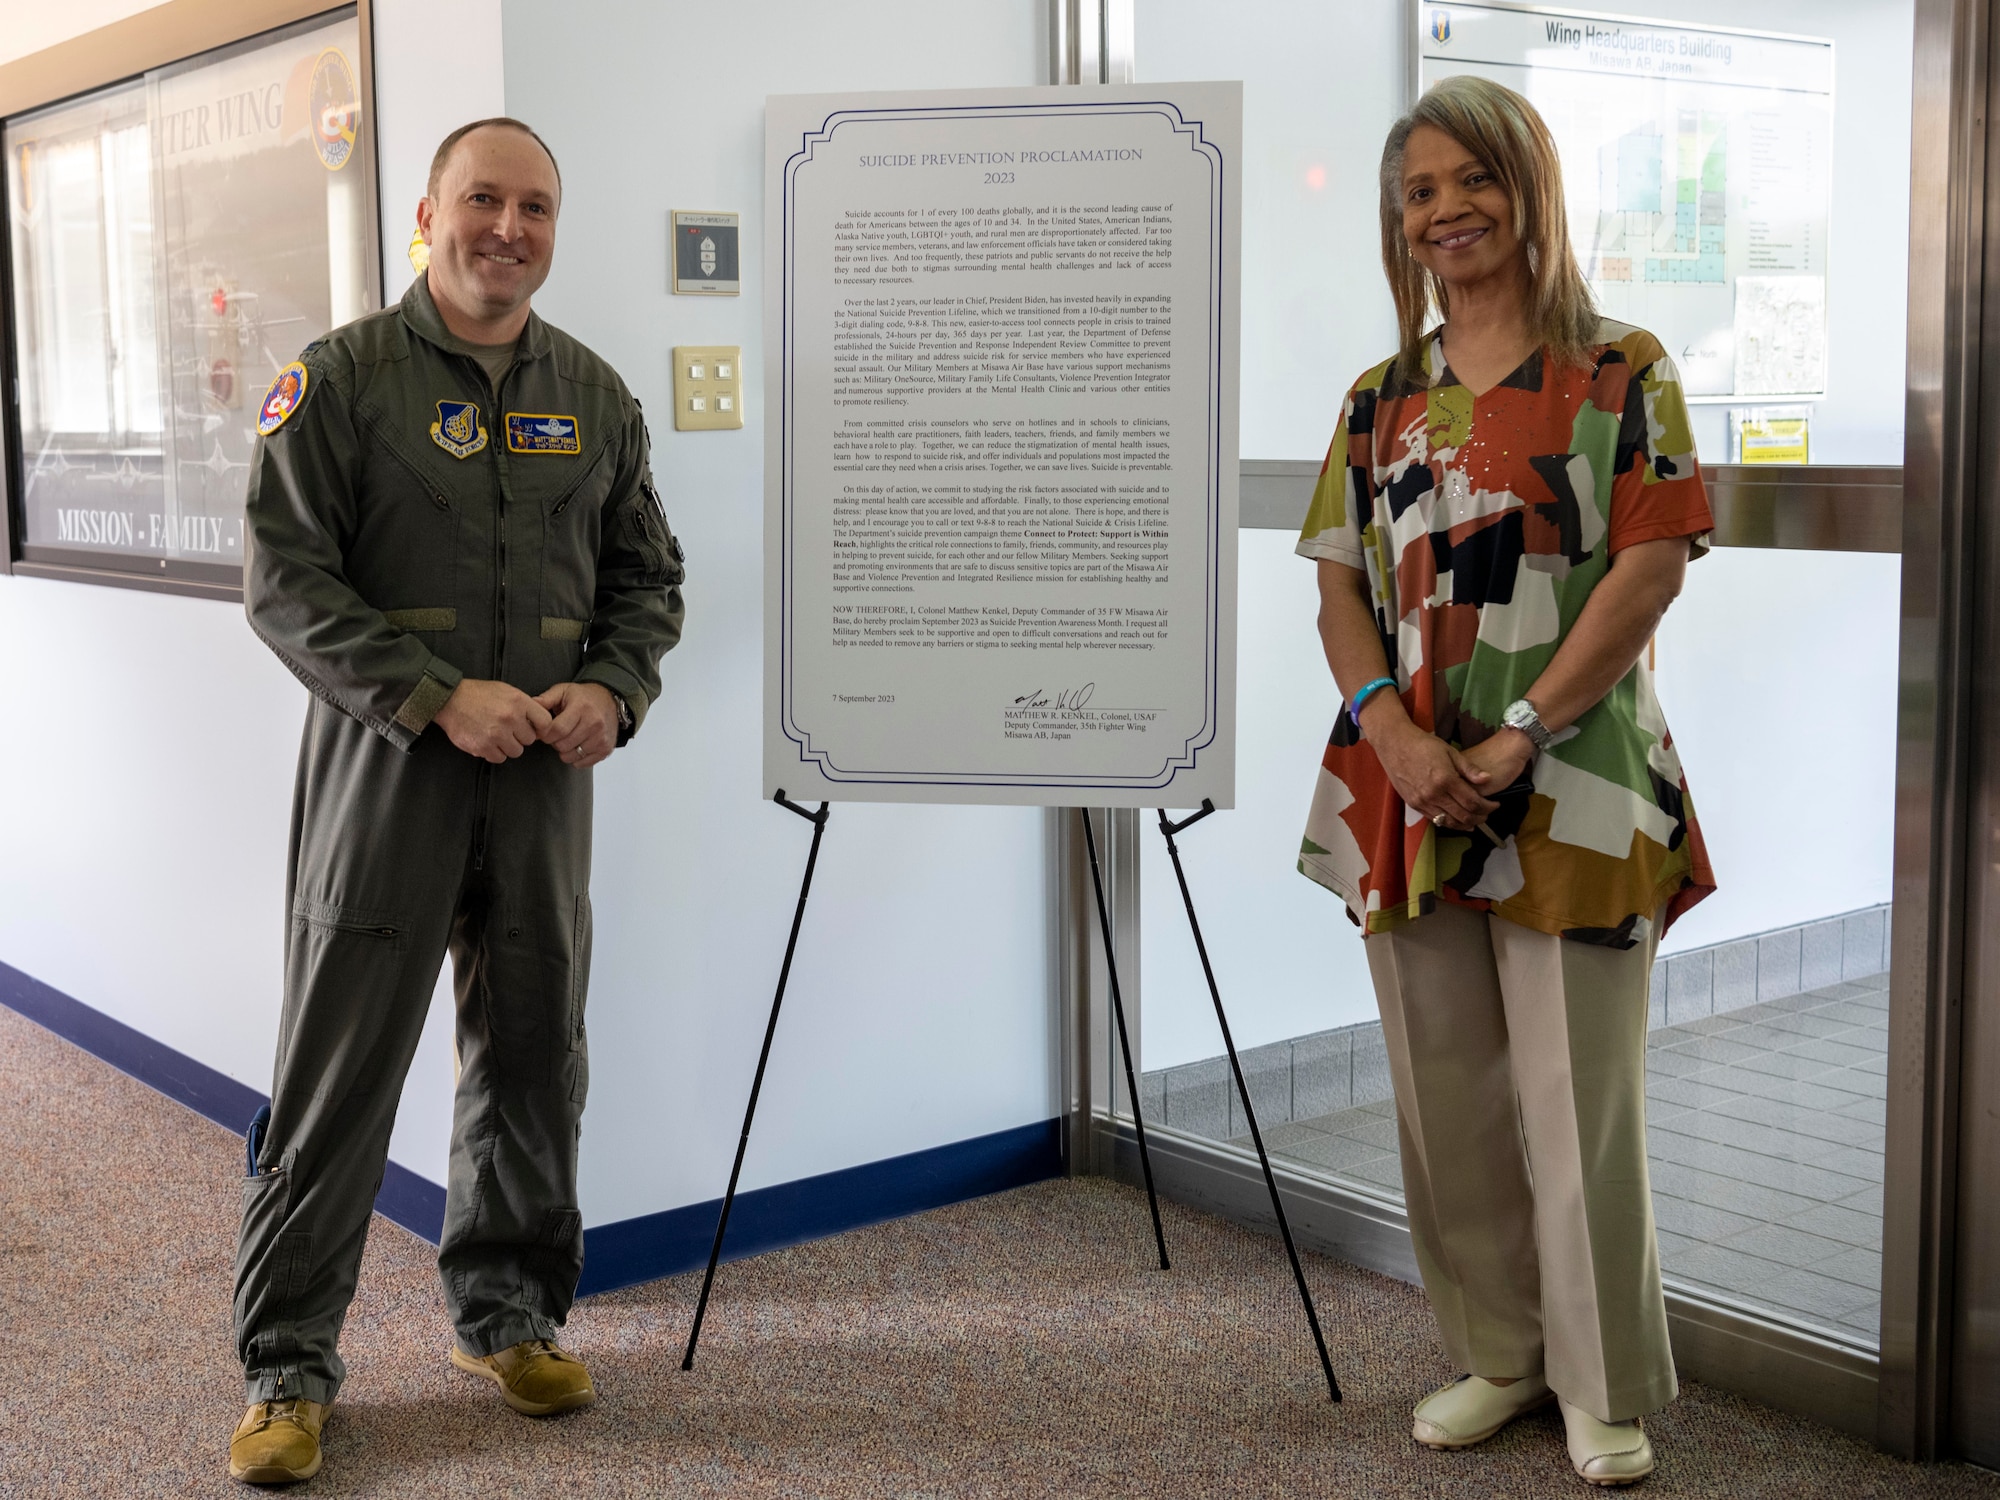 U.S. Air Force Col. Matthew Kenkel, 35th Fighter Wing deputy commander, and Andrea Bowen, 35th FW violence prevention integrator, stand beside Misawa’s 2023 Suicide Prevention Proclamation at Misawa Air Base, Japan.